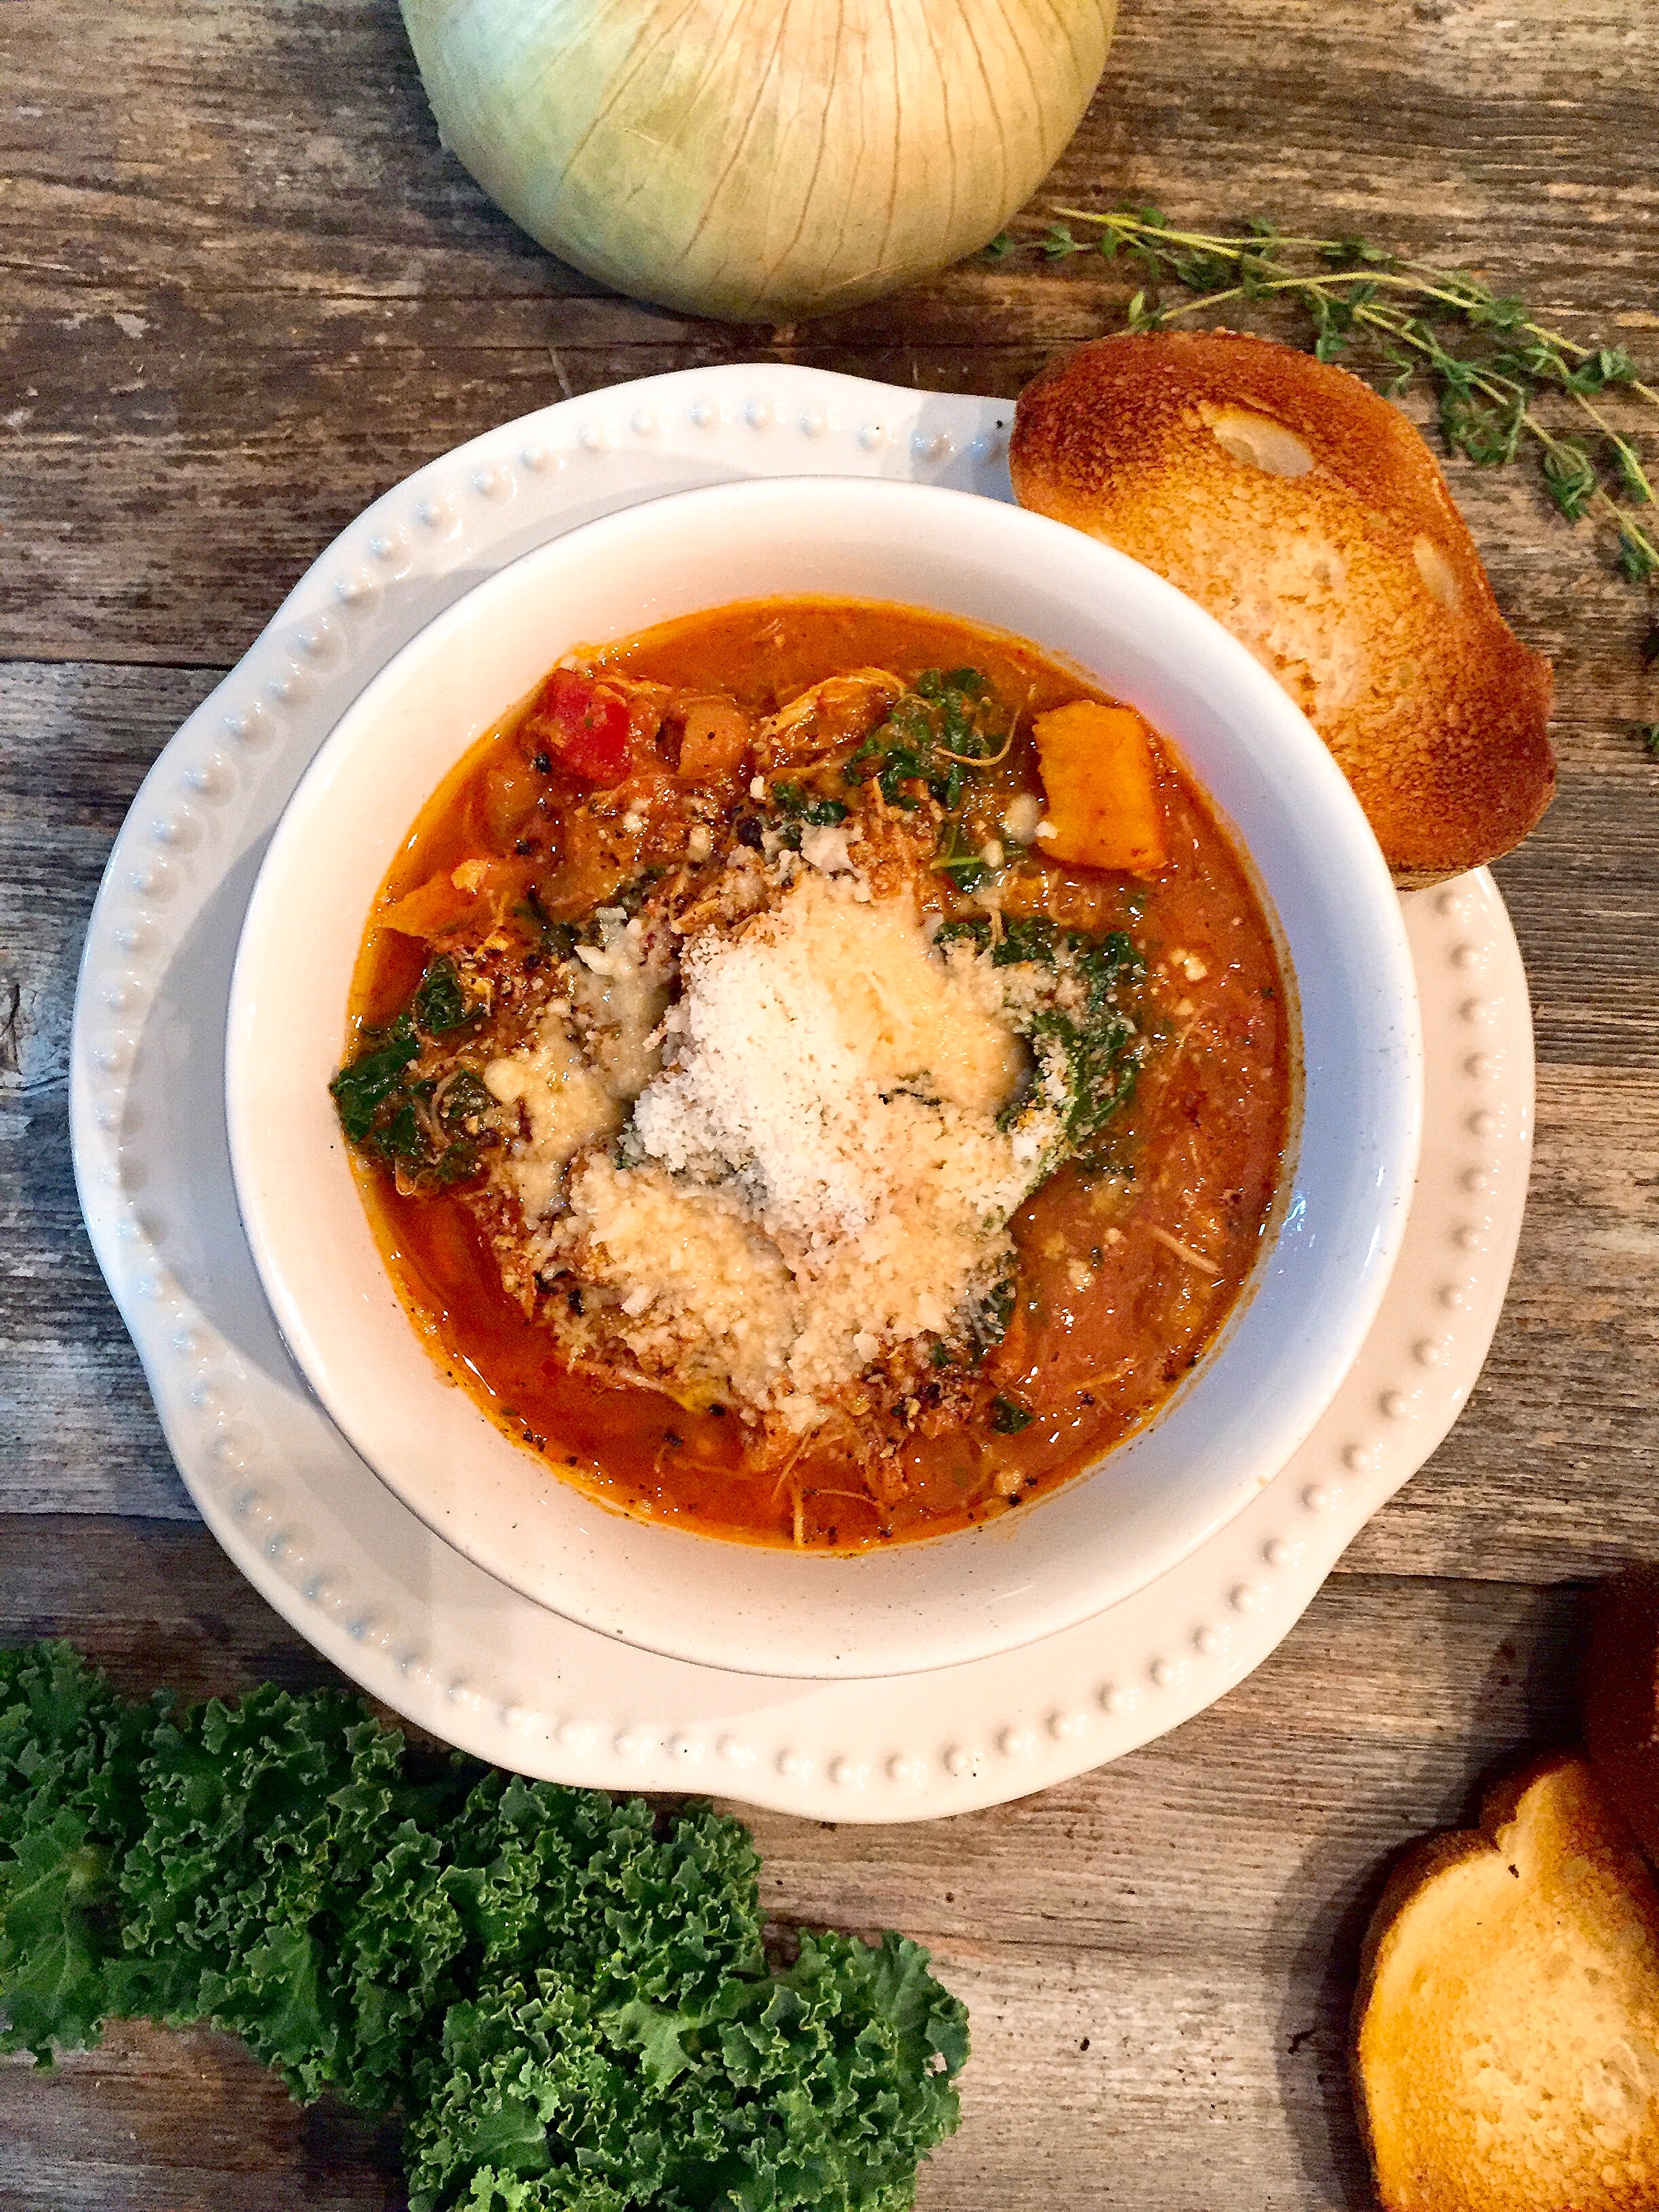 chicken-chili-stew-with-sweet-potatoes-and-kale